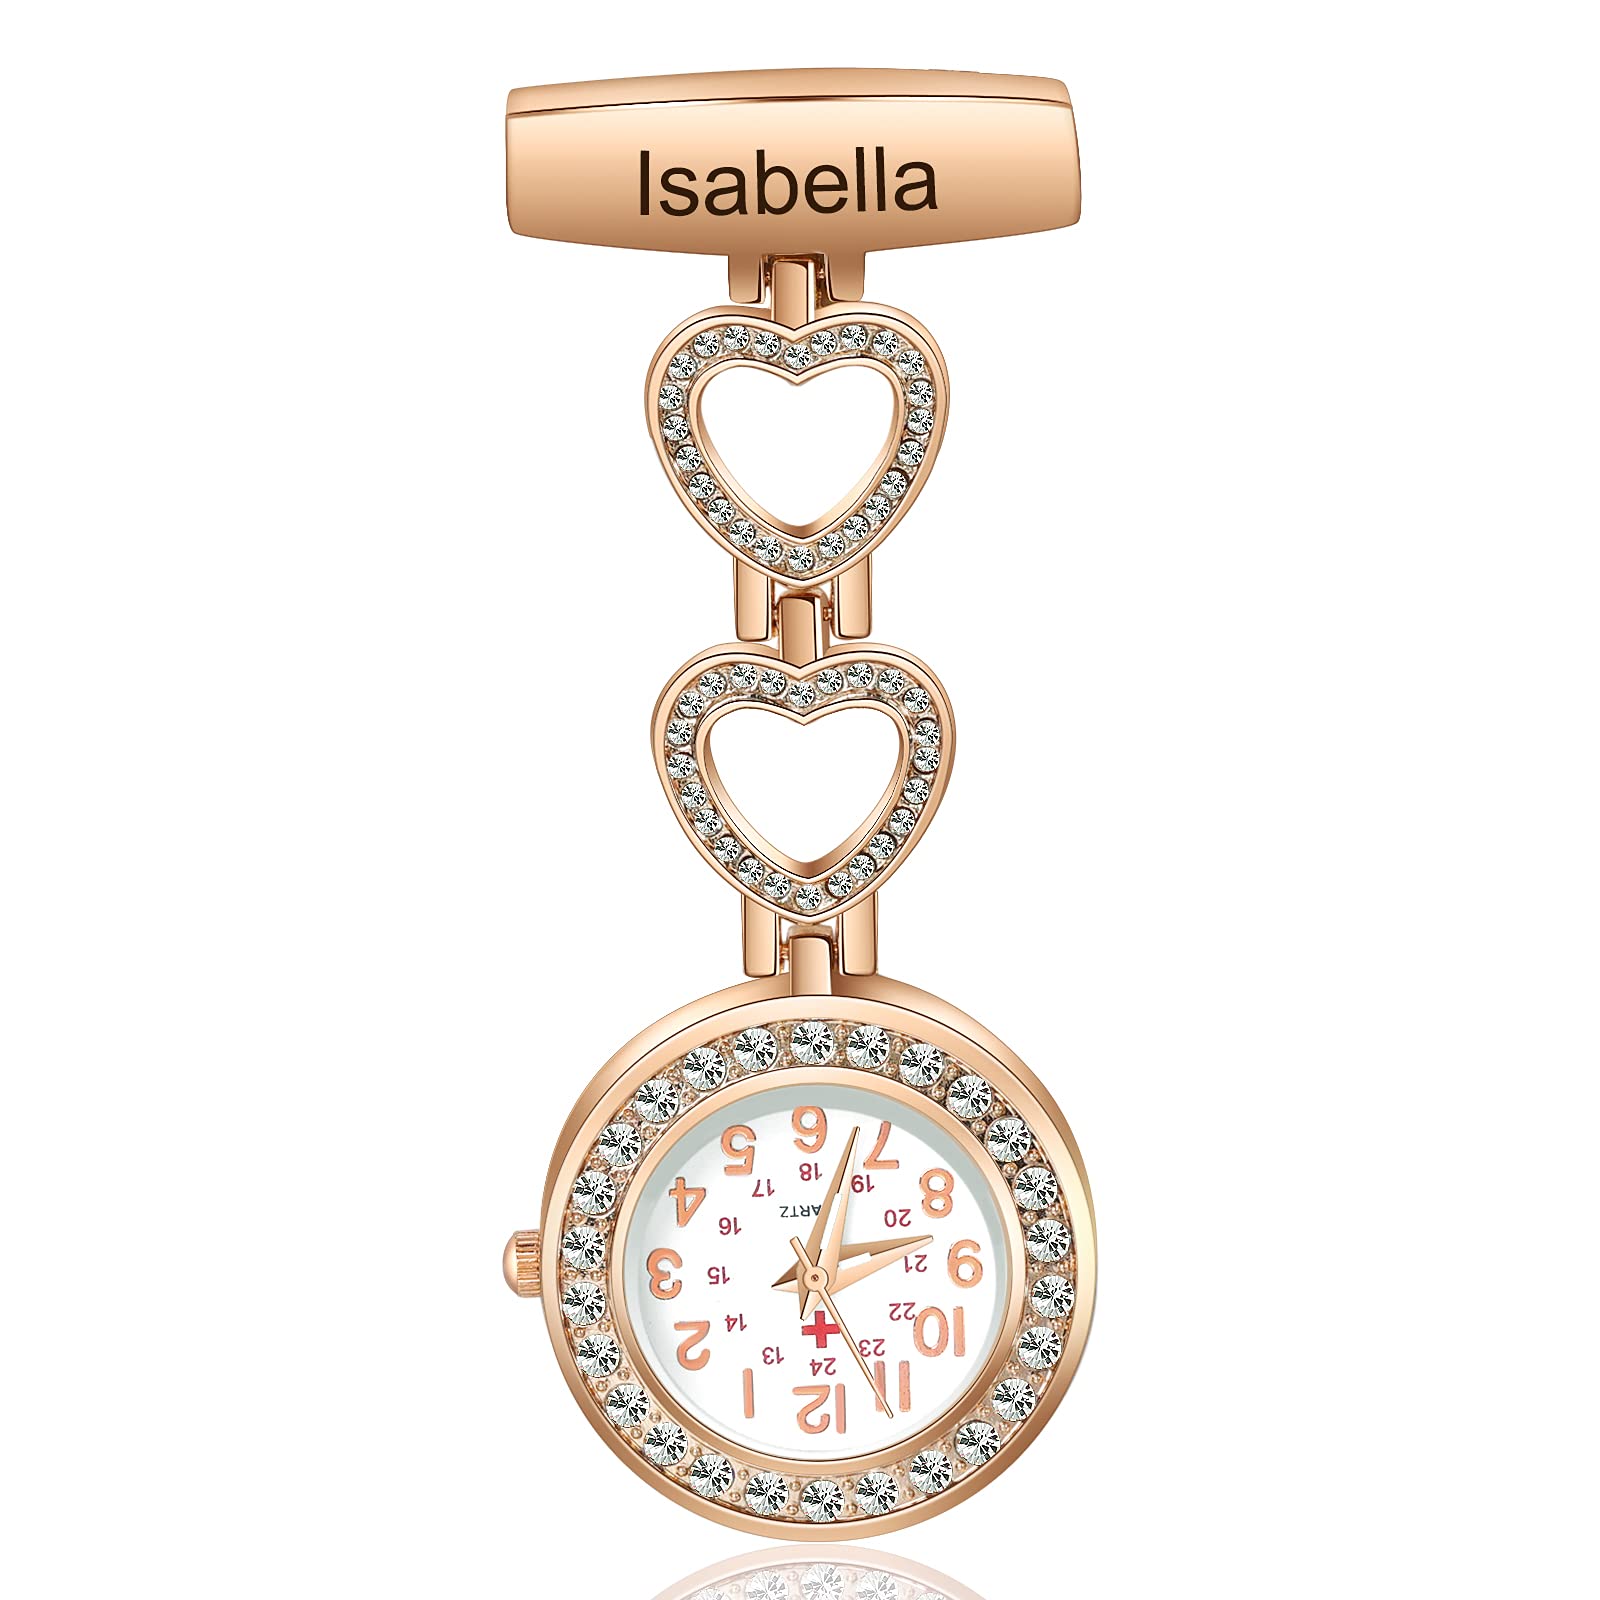 Nurse Watches for Nurses Doctors, Custom Nurse Watches Hanging Engraved Name Lapel Pin Watch on Nursing Watch, Personalized Nurses Pocket Watches for Graduation Birthday Valentine's Day Mothers Day